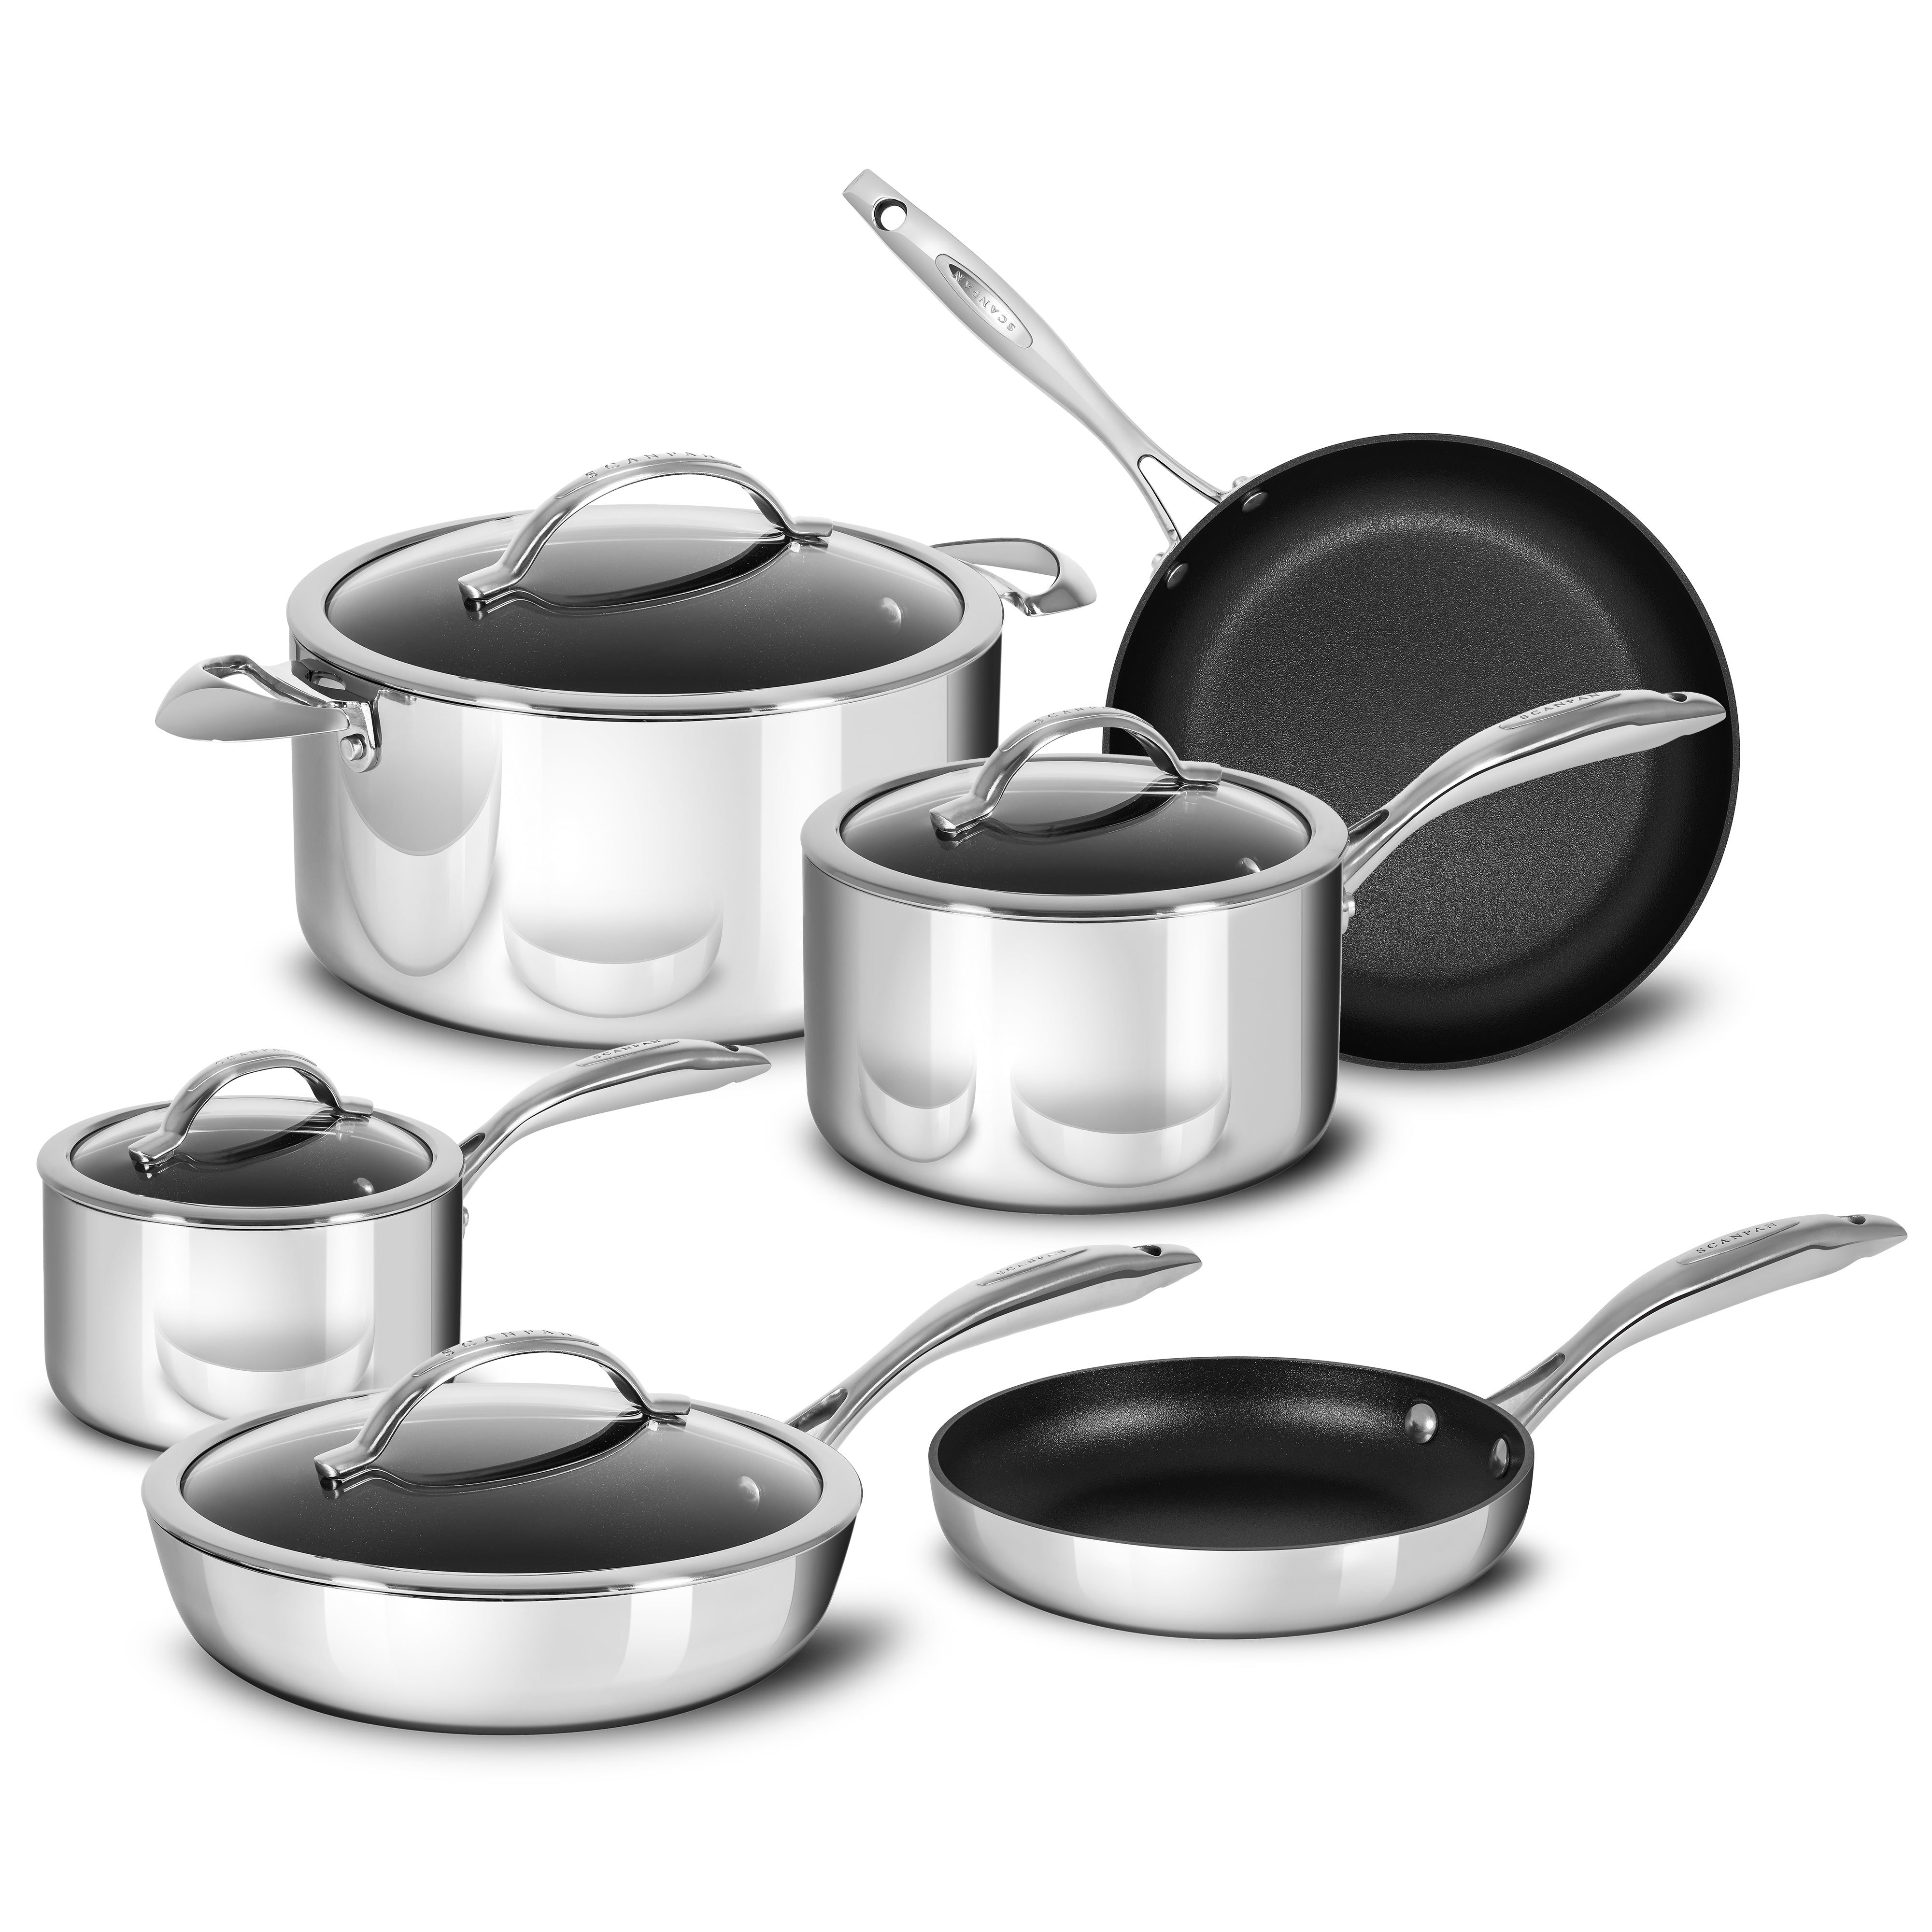 5 Piece Stainless Steel Non-Stick Cookware Set